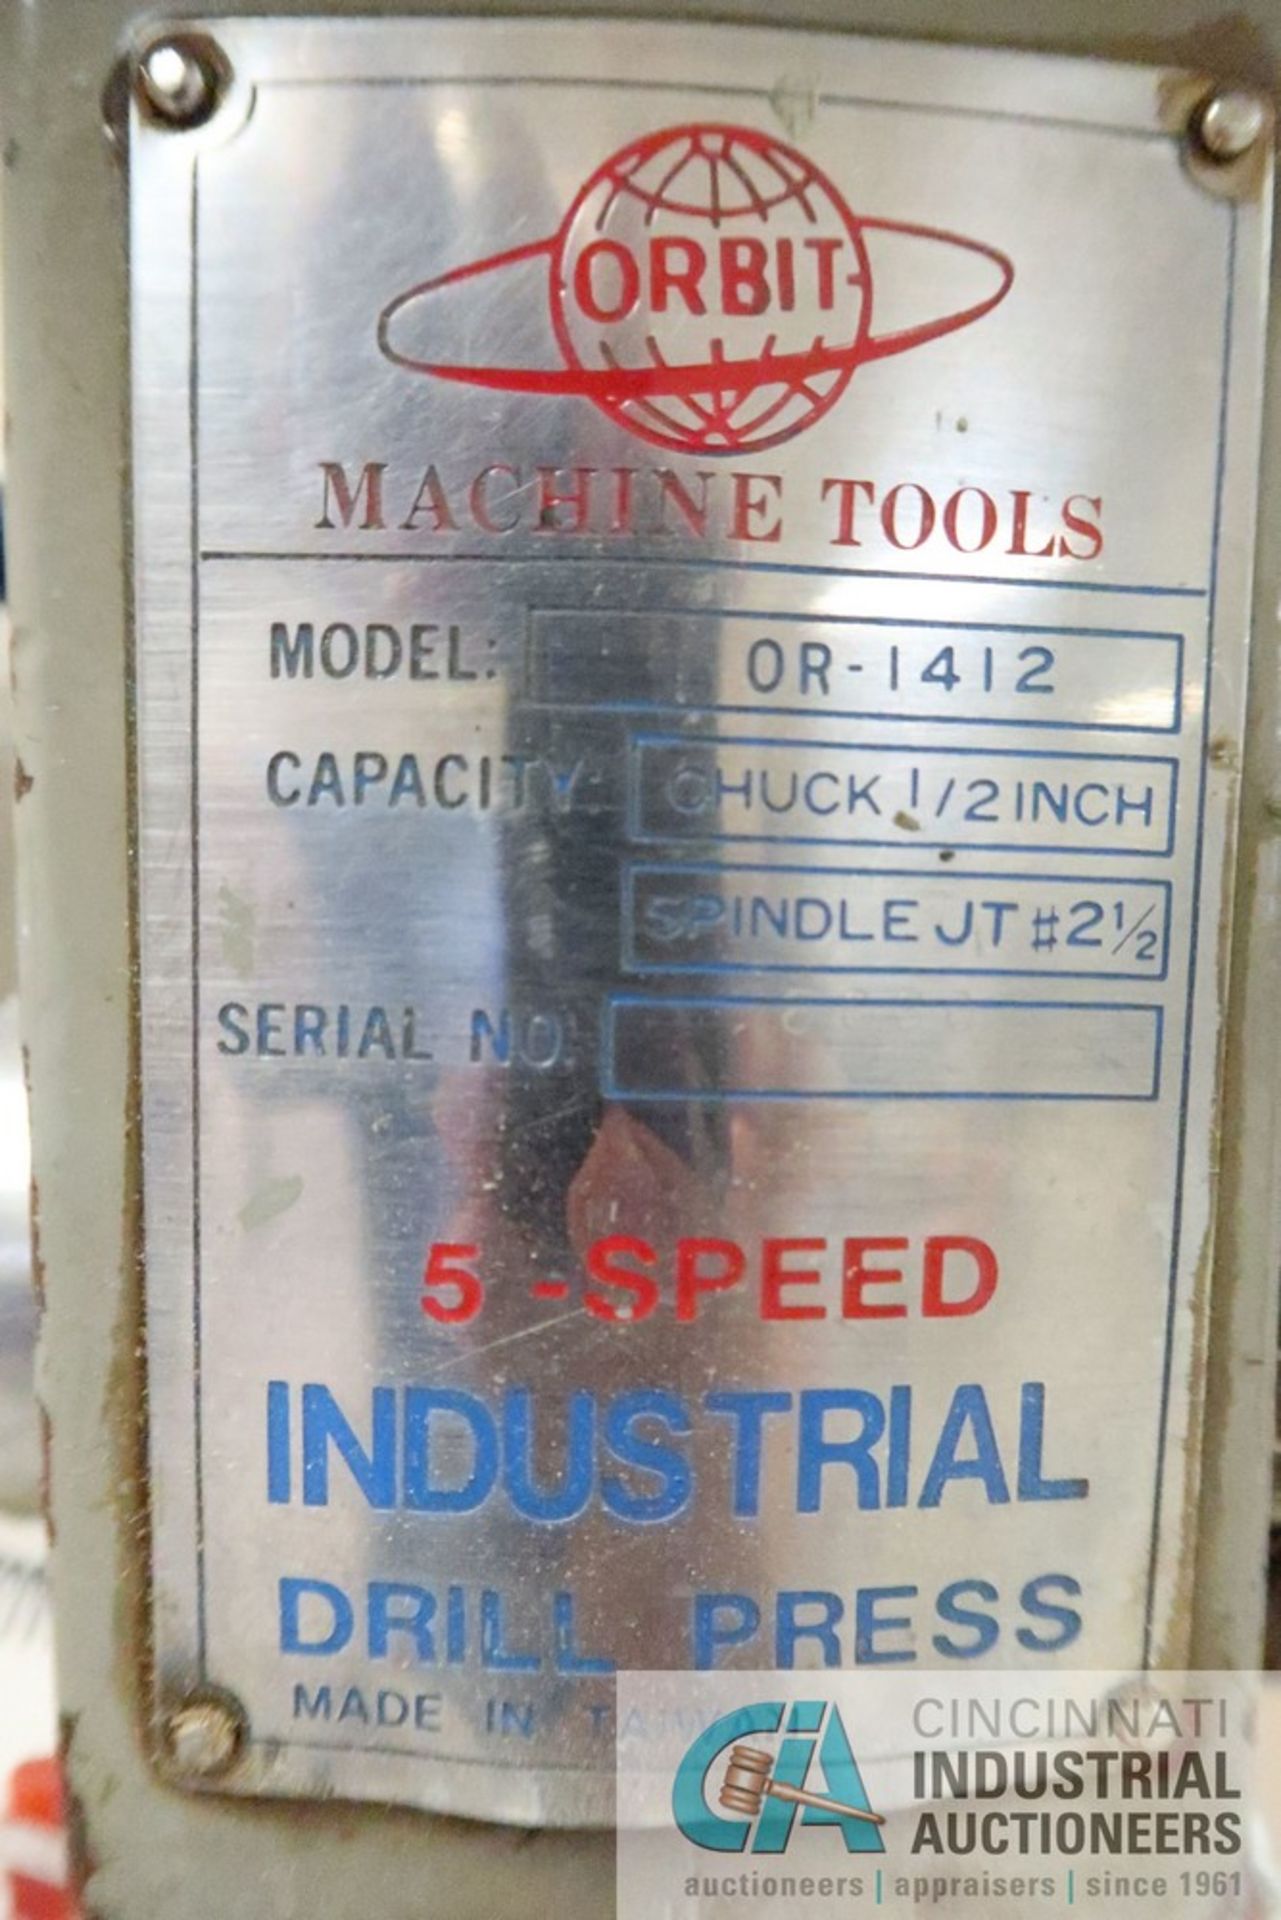 ORBIT MACHINE TOOLS DRILL PRESS, 15" MODEL OR1412, 1/2" CAPACITY, SINGLE SPINDLE - Image 3 of 3